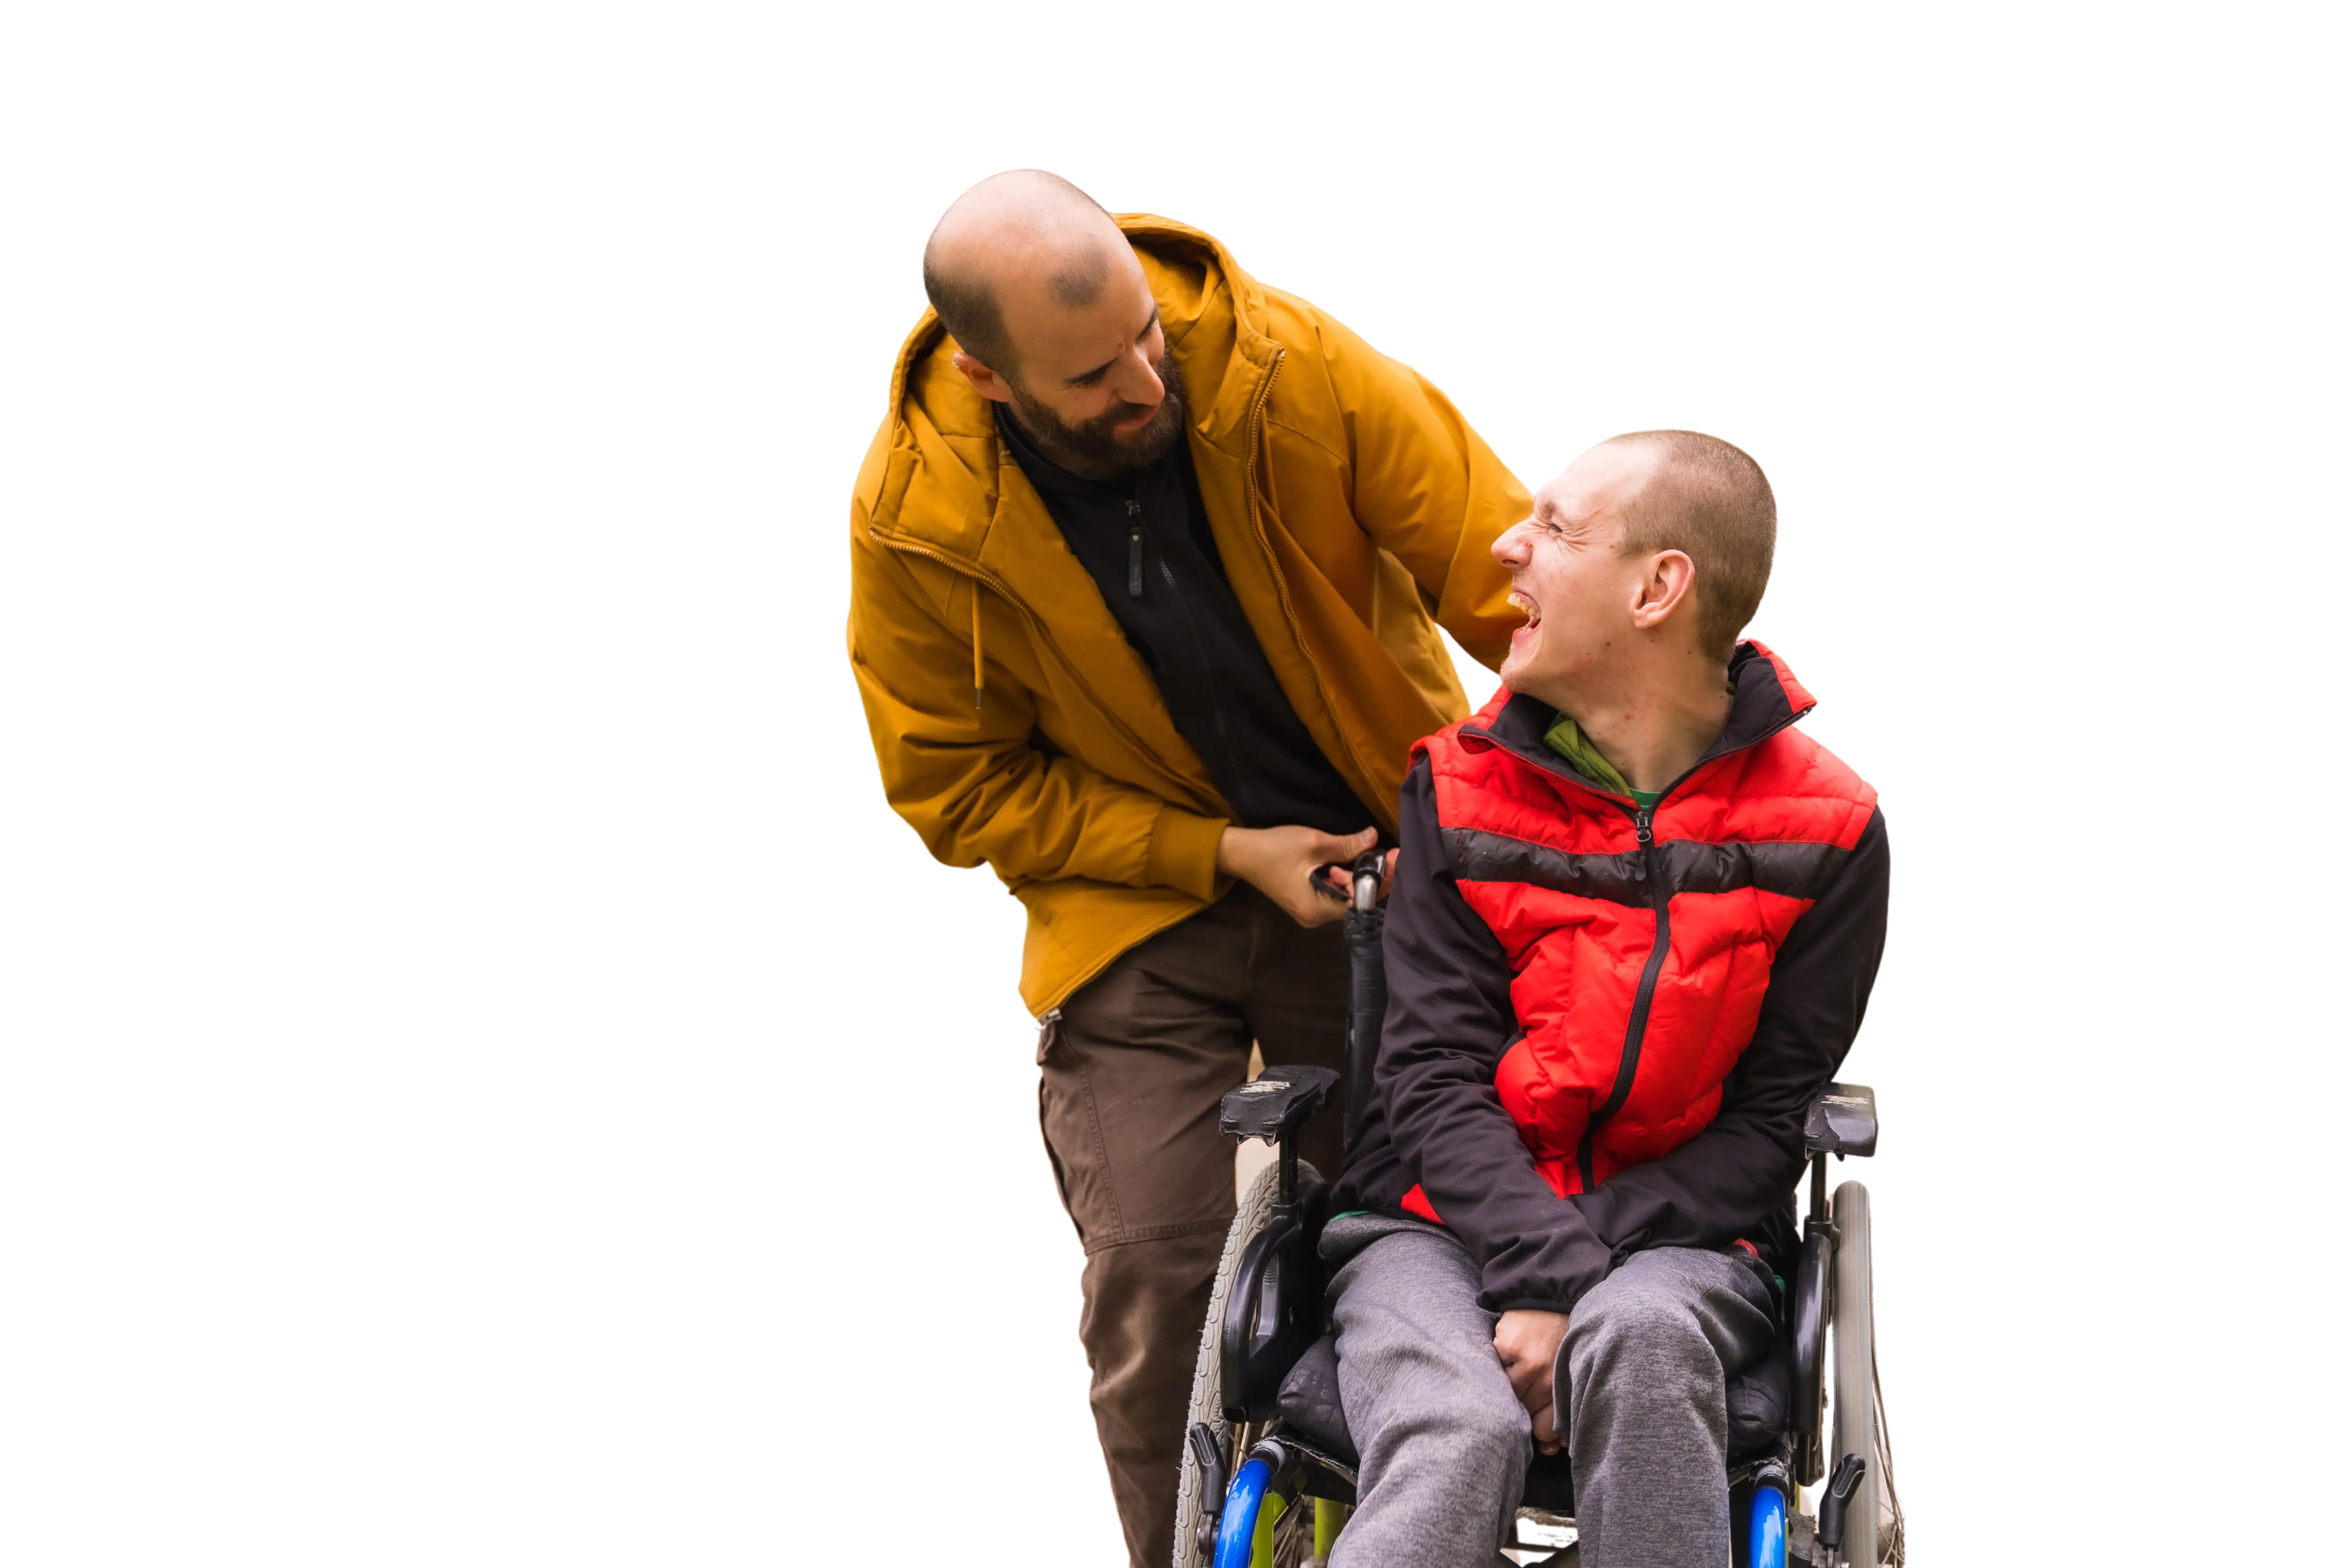 Carer pushing care patient on a wheel chair